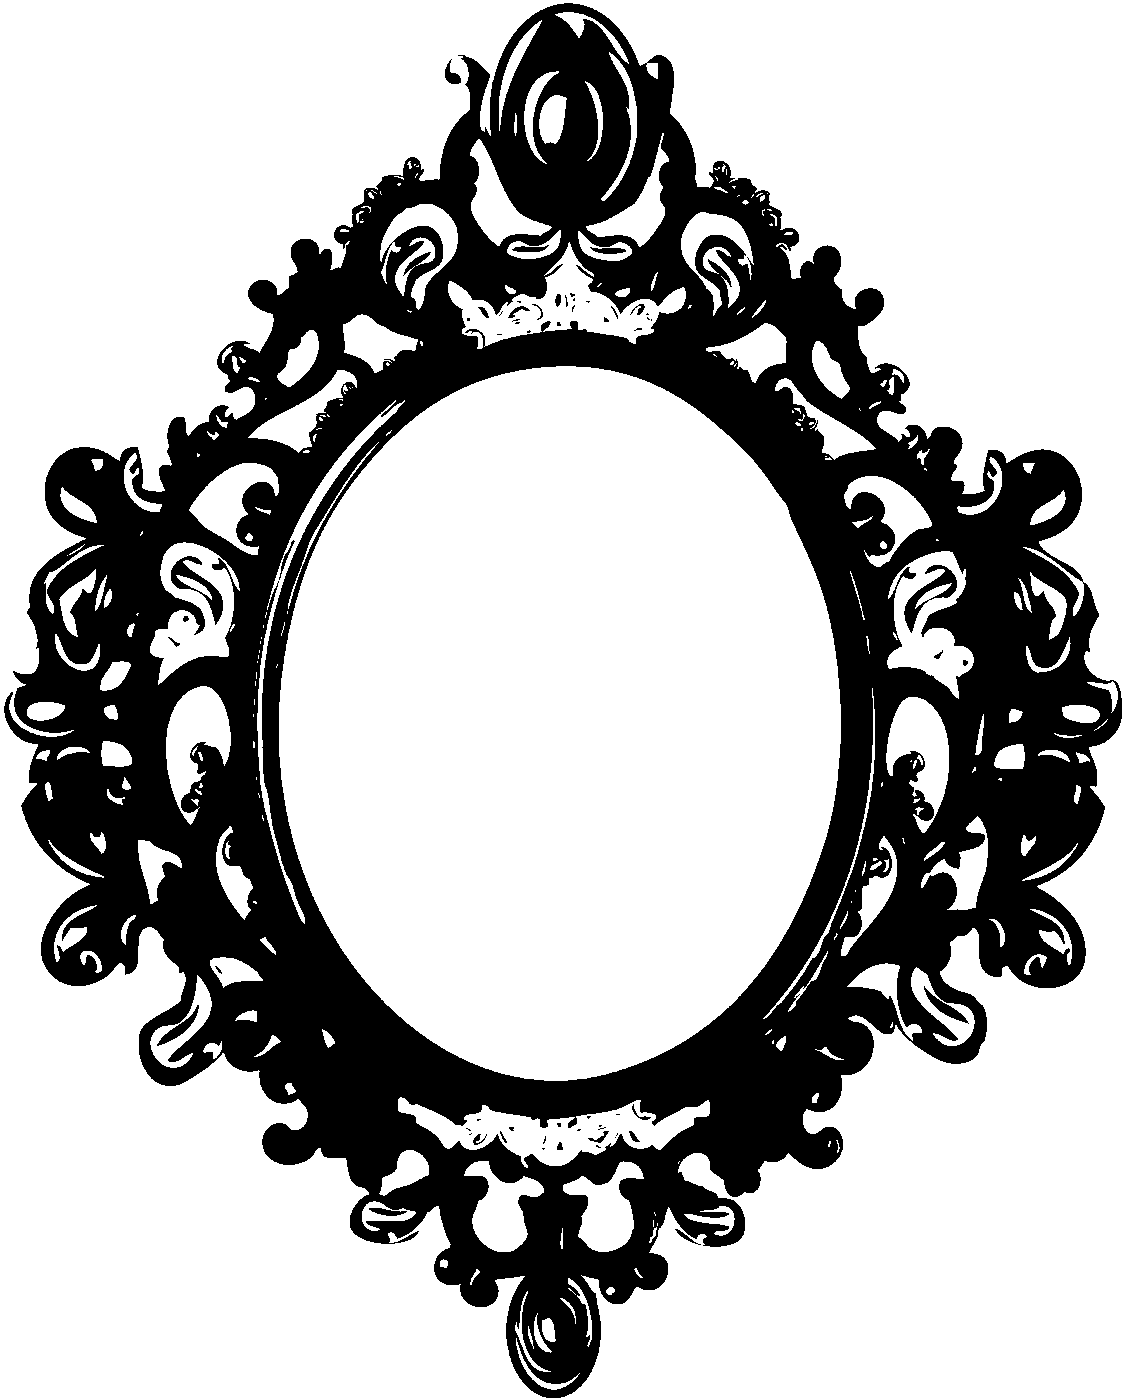 Antique oval frame clipart